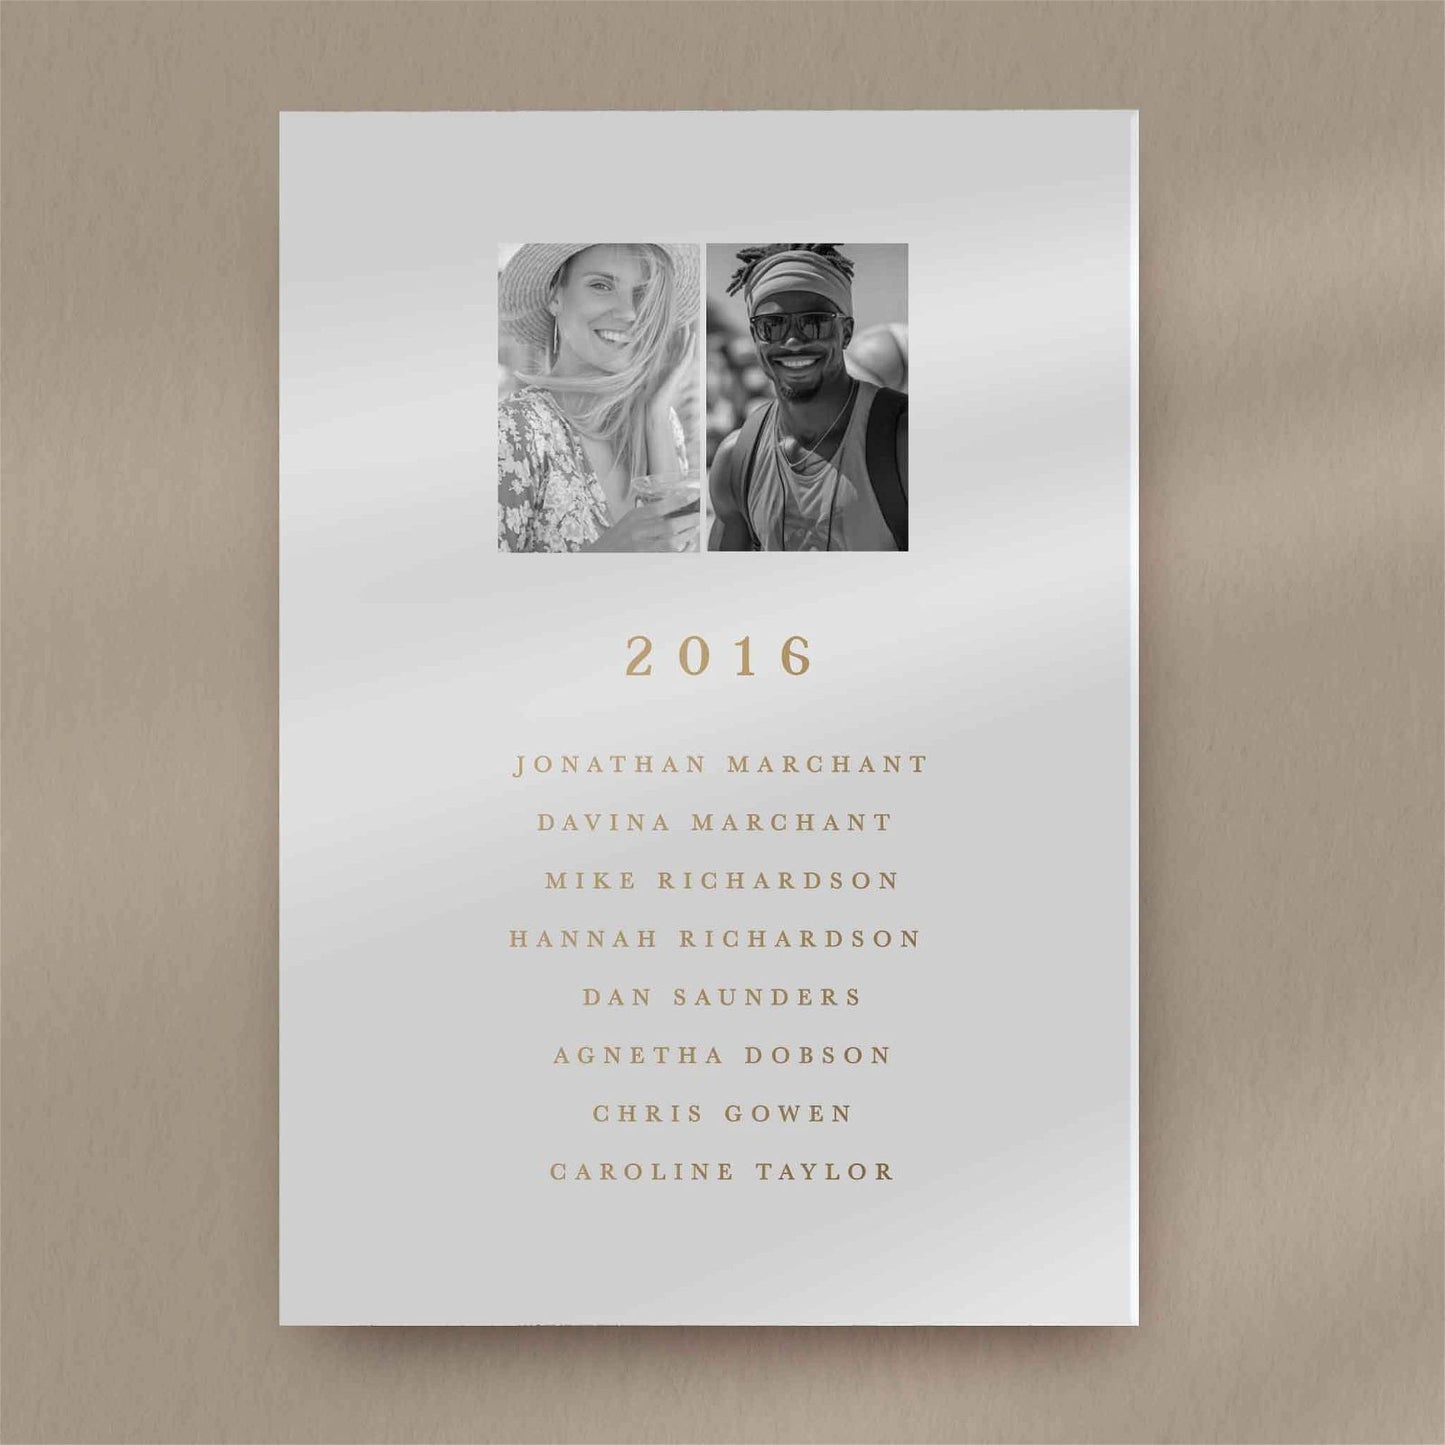 Heidi Seating Plan Card  Ivy and Gold Wedding Stationery   